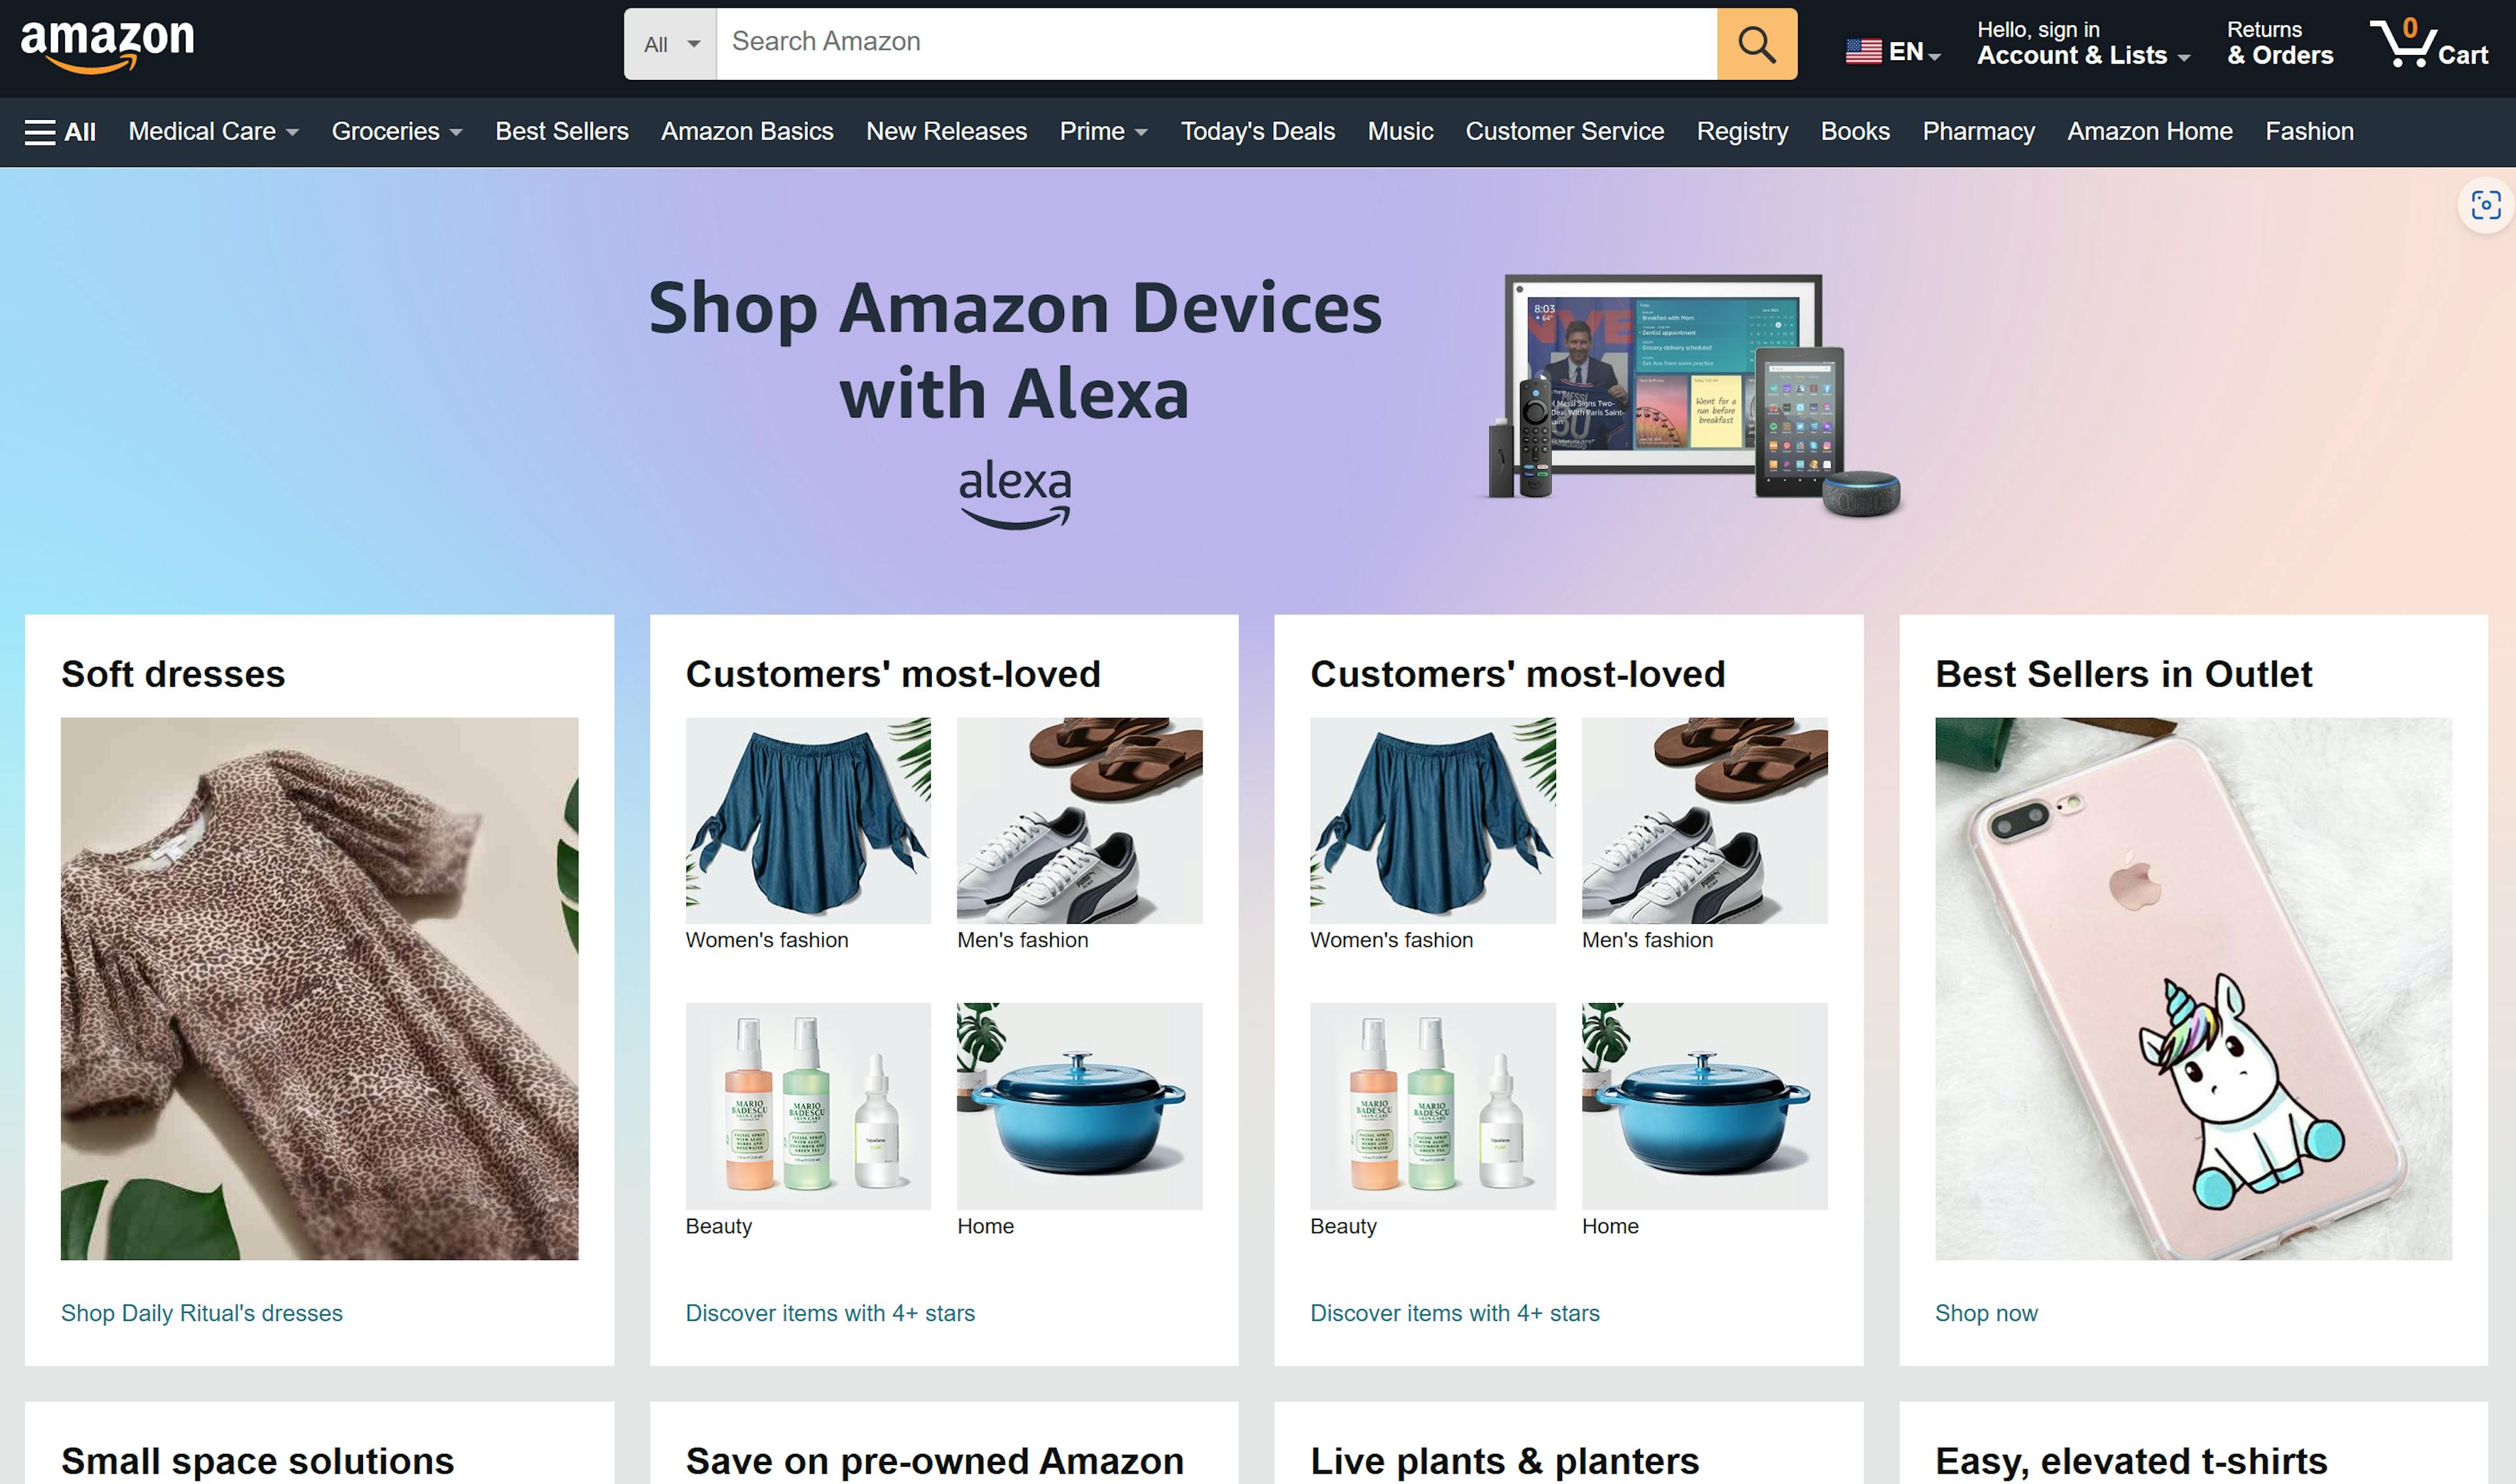 Amazon is a 'quantum-like' website. No two people will get the same Amazon homepage because of its personalized design.